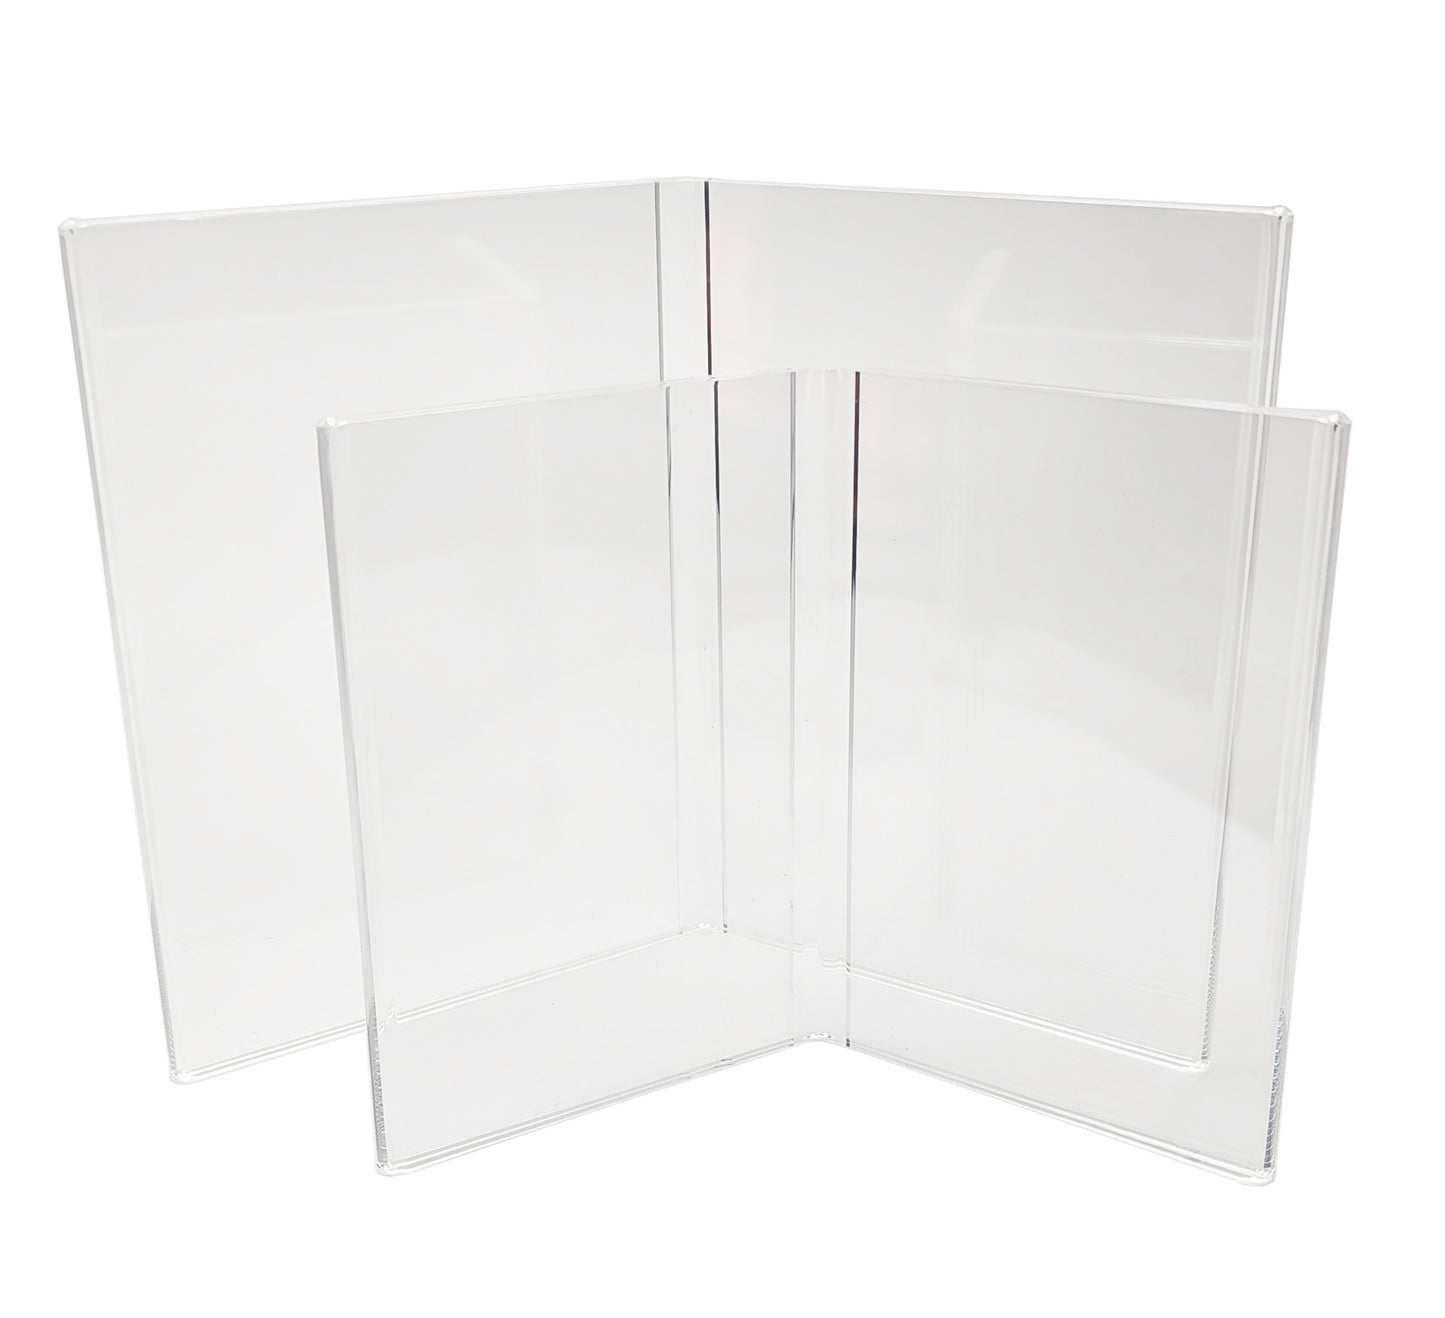 Double acrylic glass frame with Magic Footprint Special Set